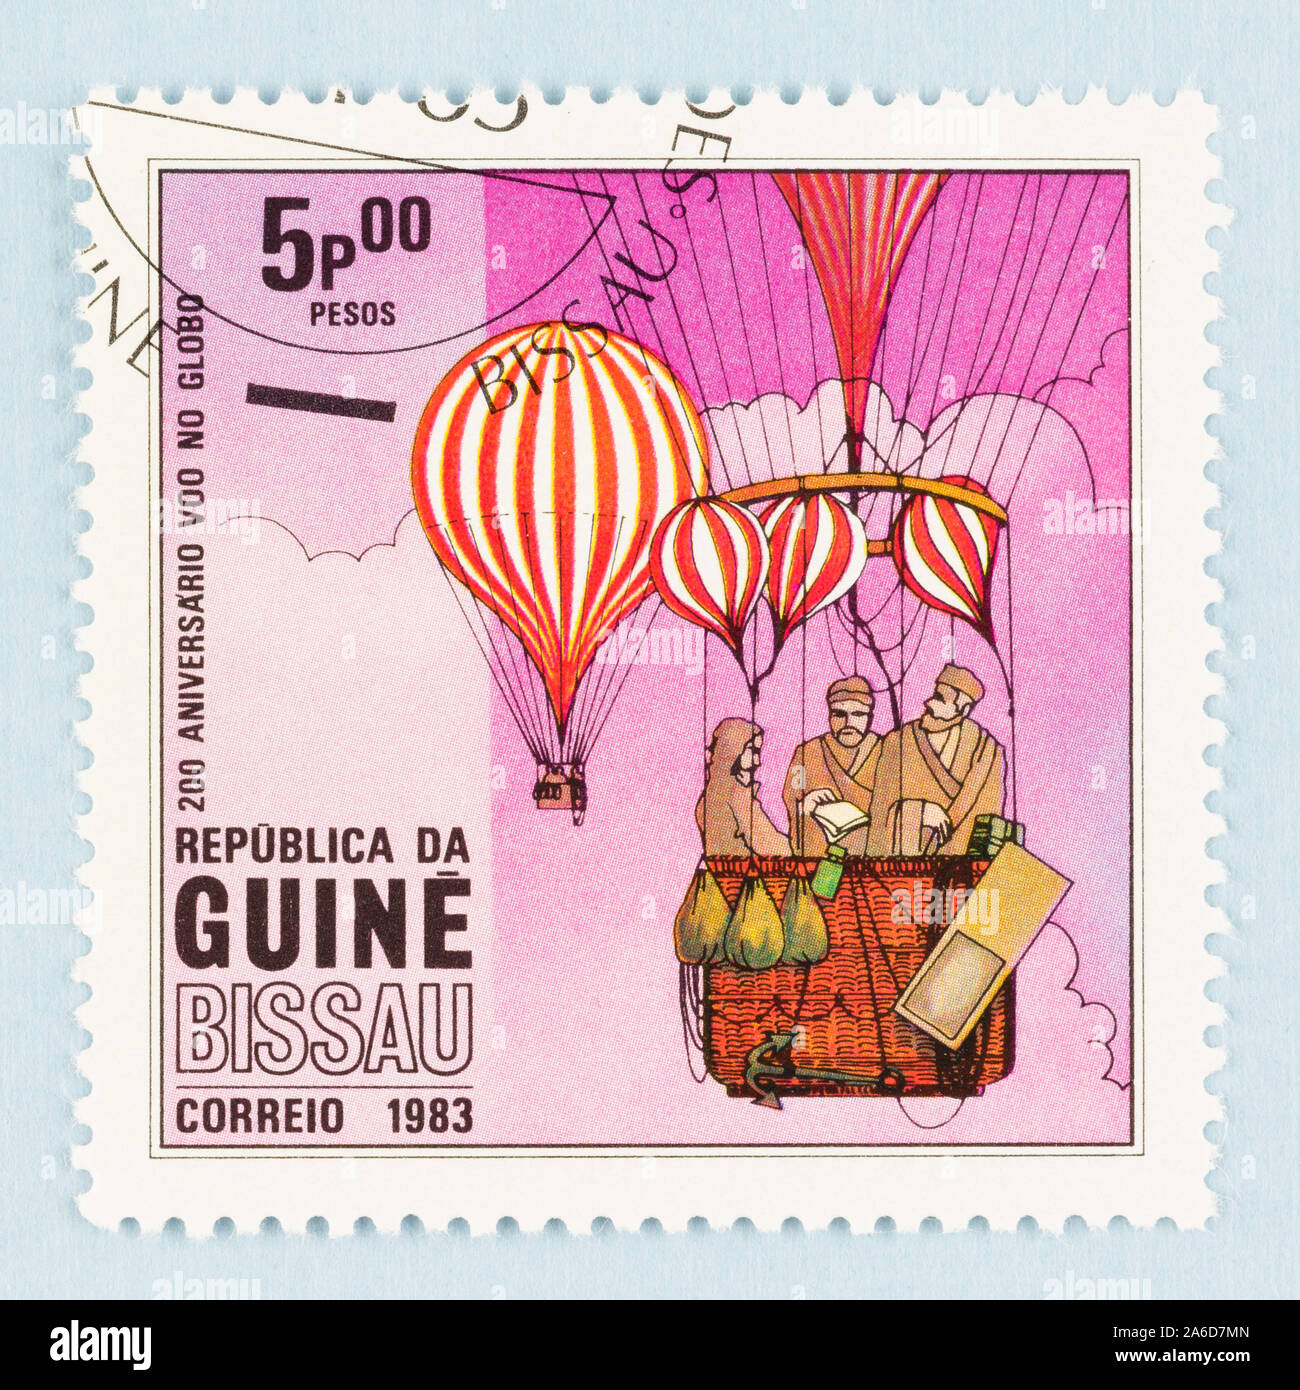 Close up of 1983 postage stamp from Guinea Bissau celebrating 200th anniversary of first untethered manned hot air balloon flight. Stock Photo